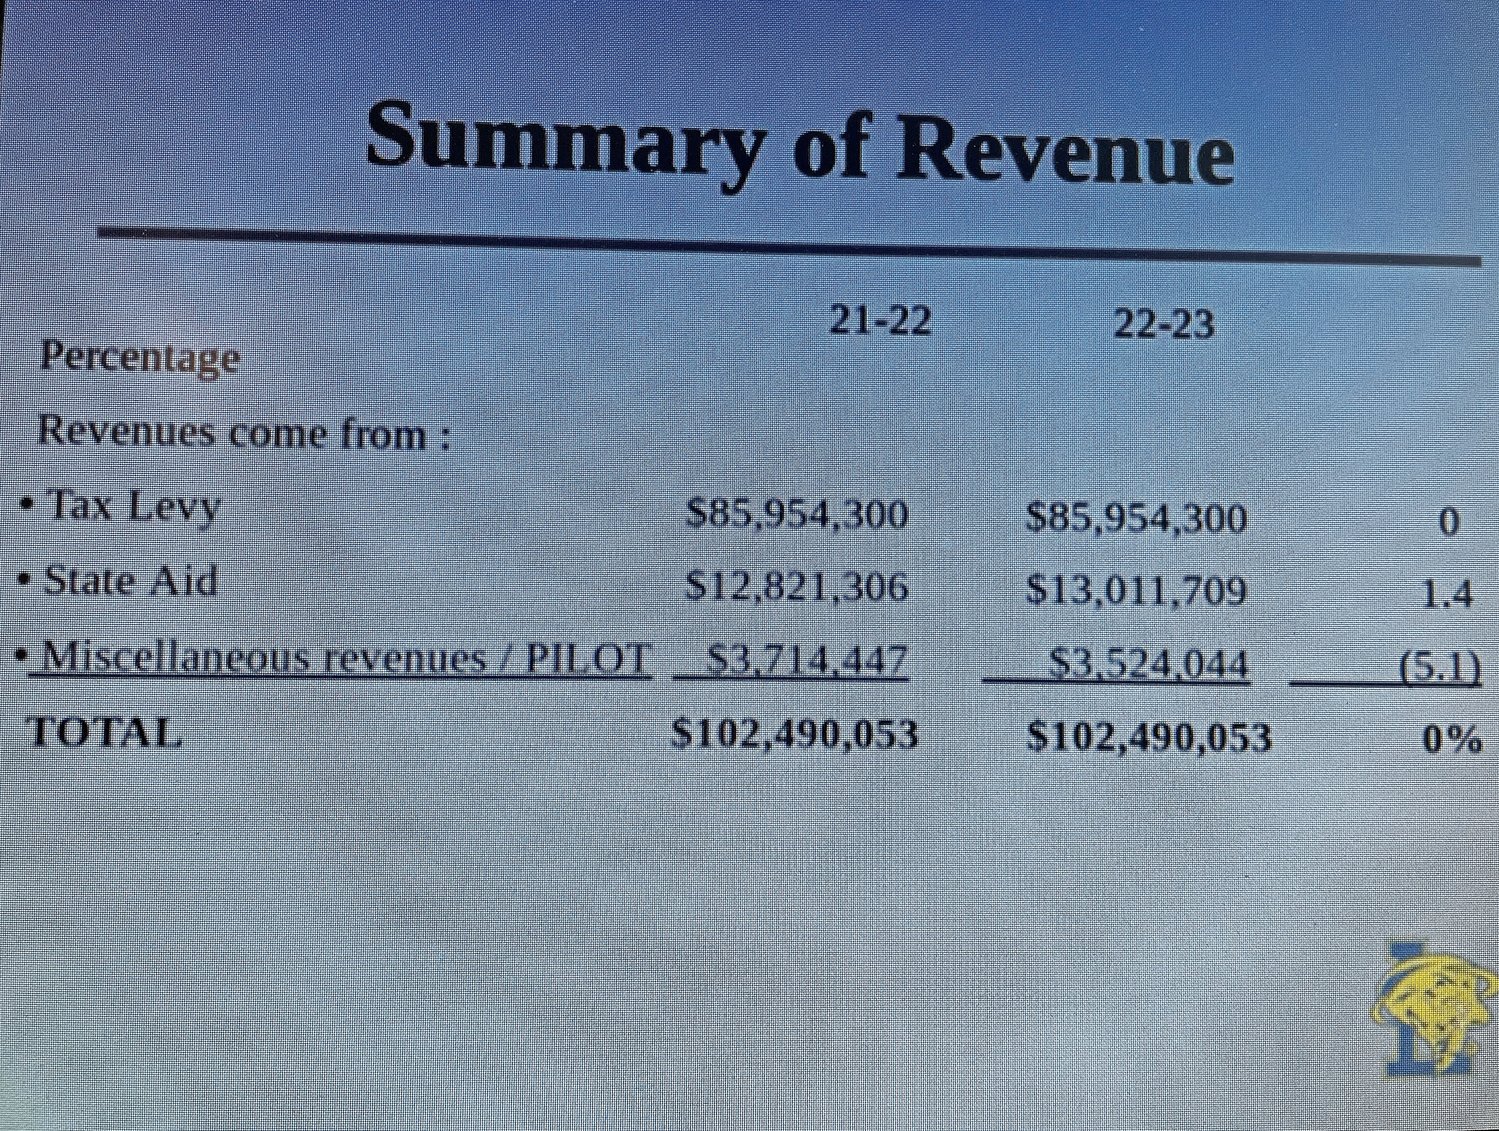 Lawrence School District revenue rundown for the current and upcoming school years.